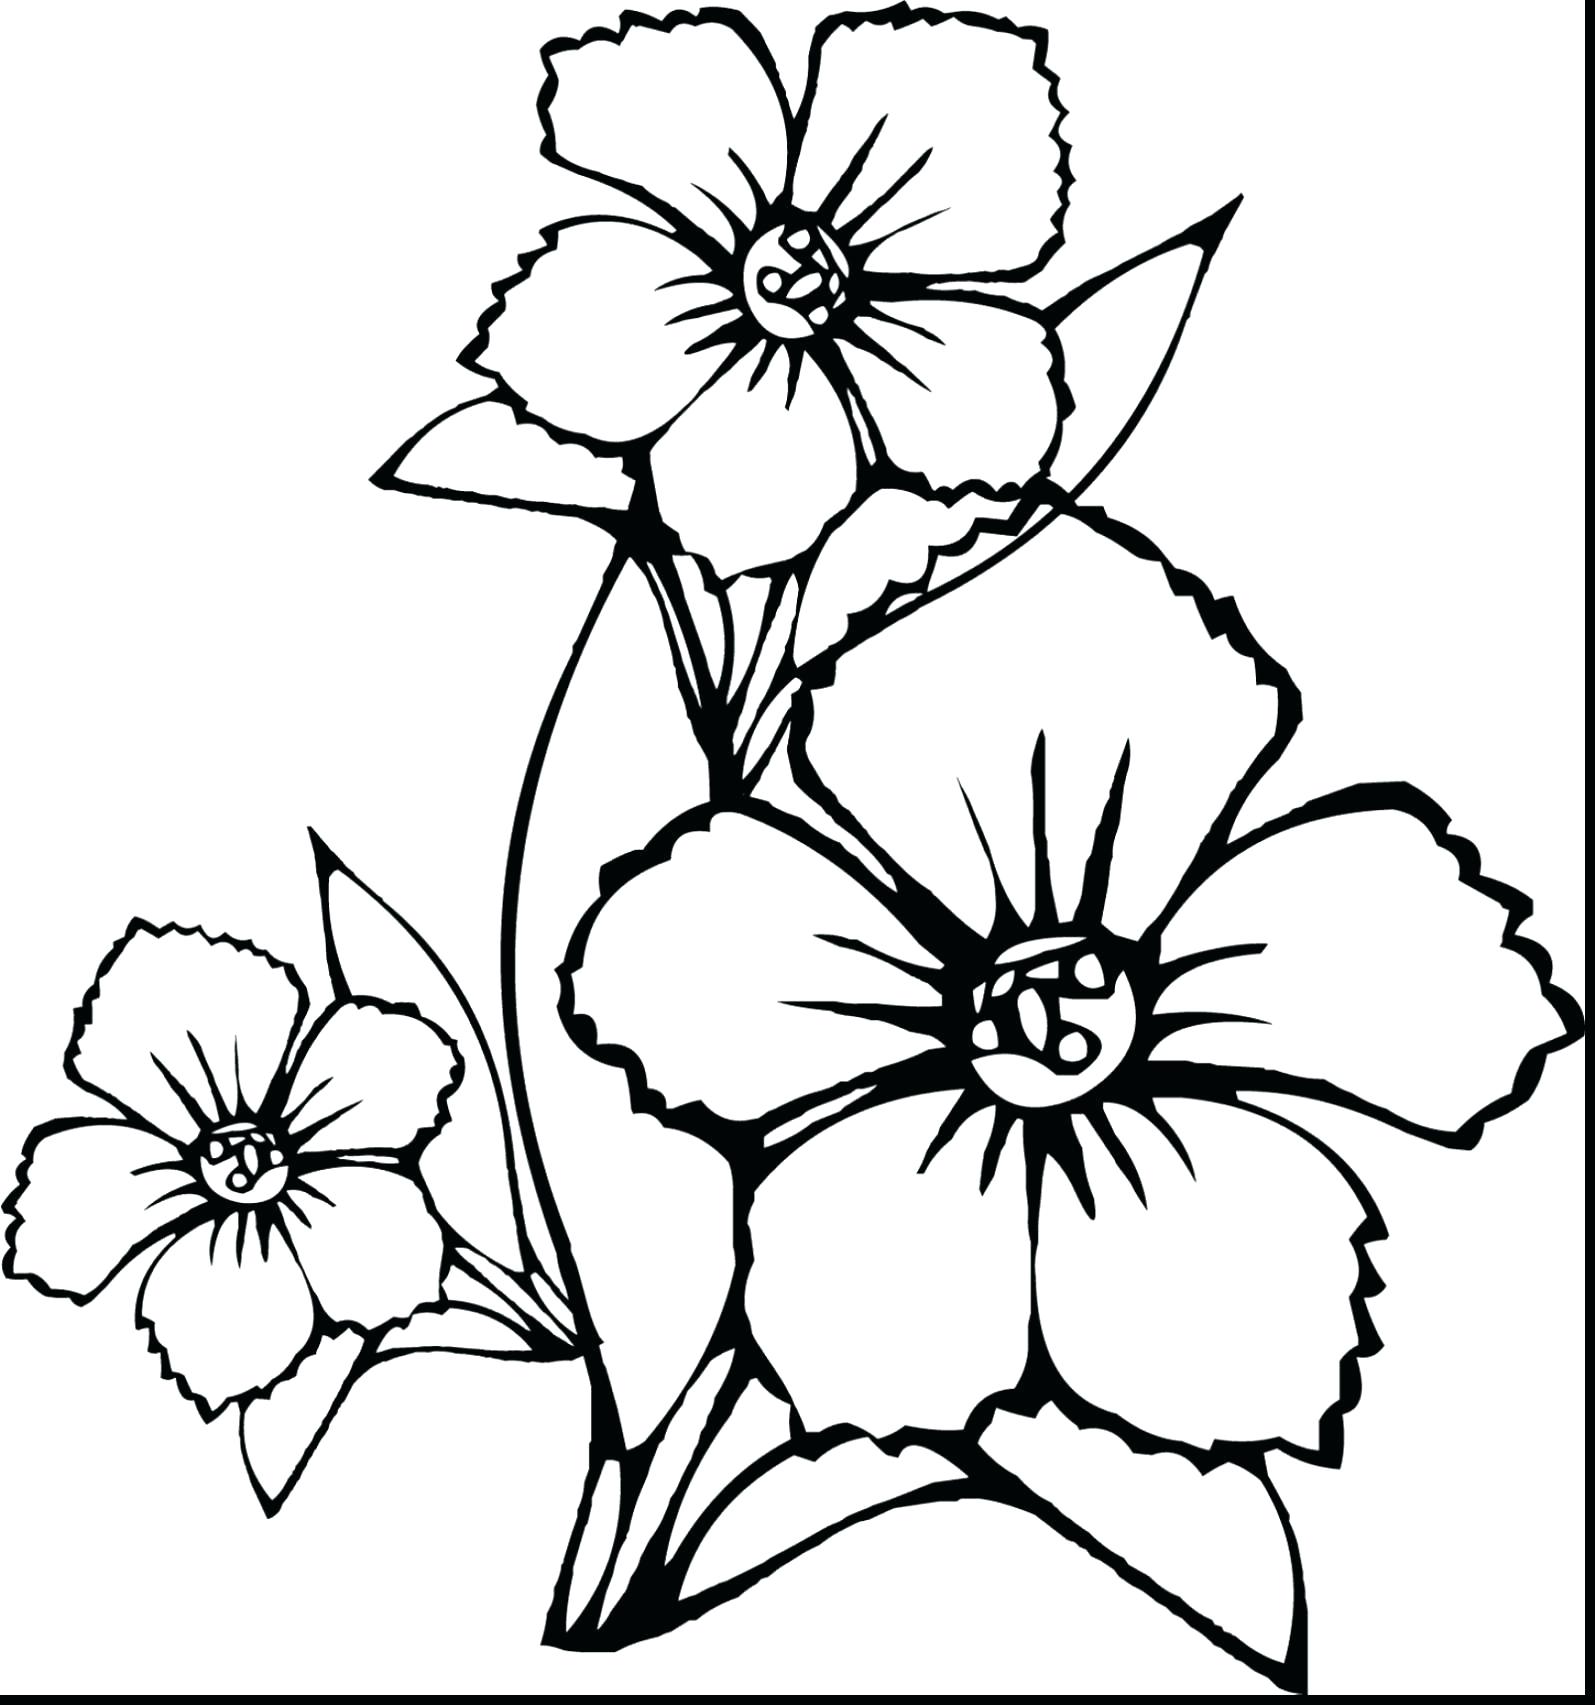 Coloring pages coloring sheet tremendous spring flower pages for kids free printable adults realistic